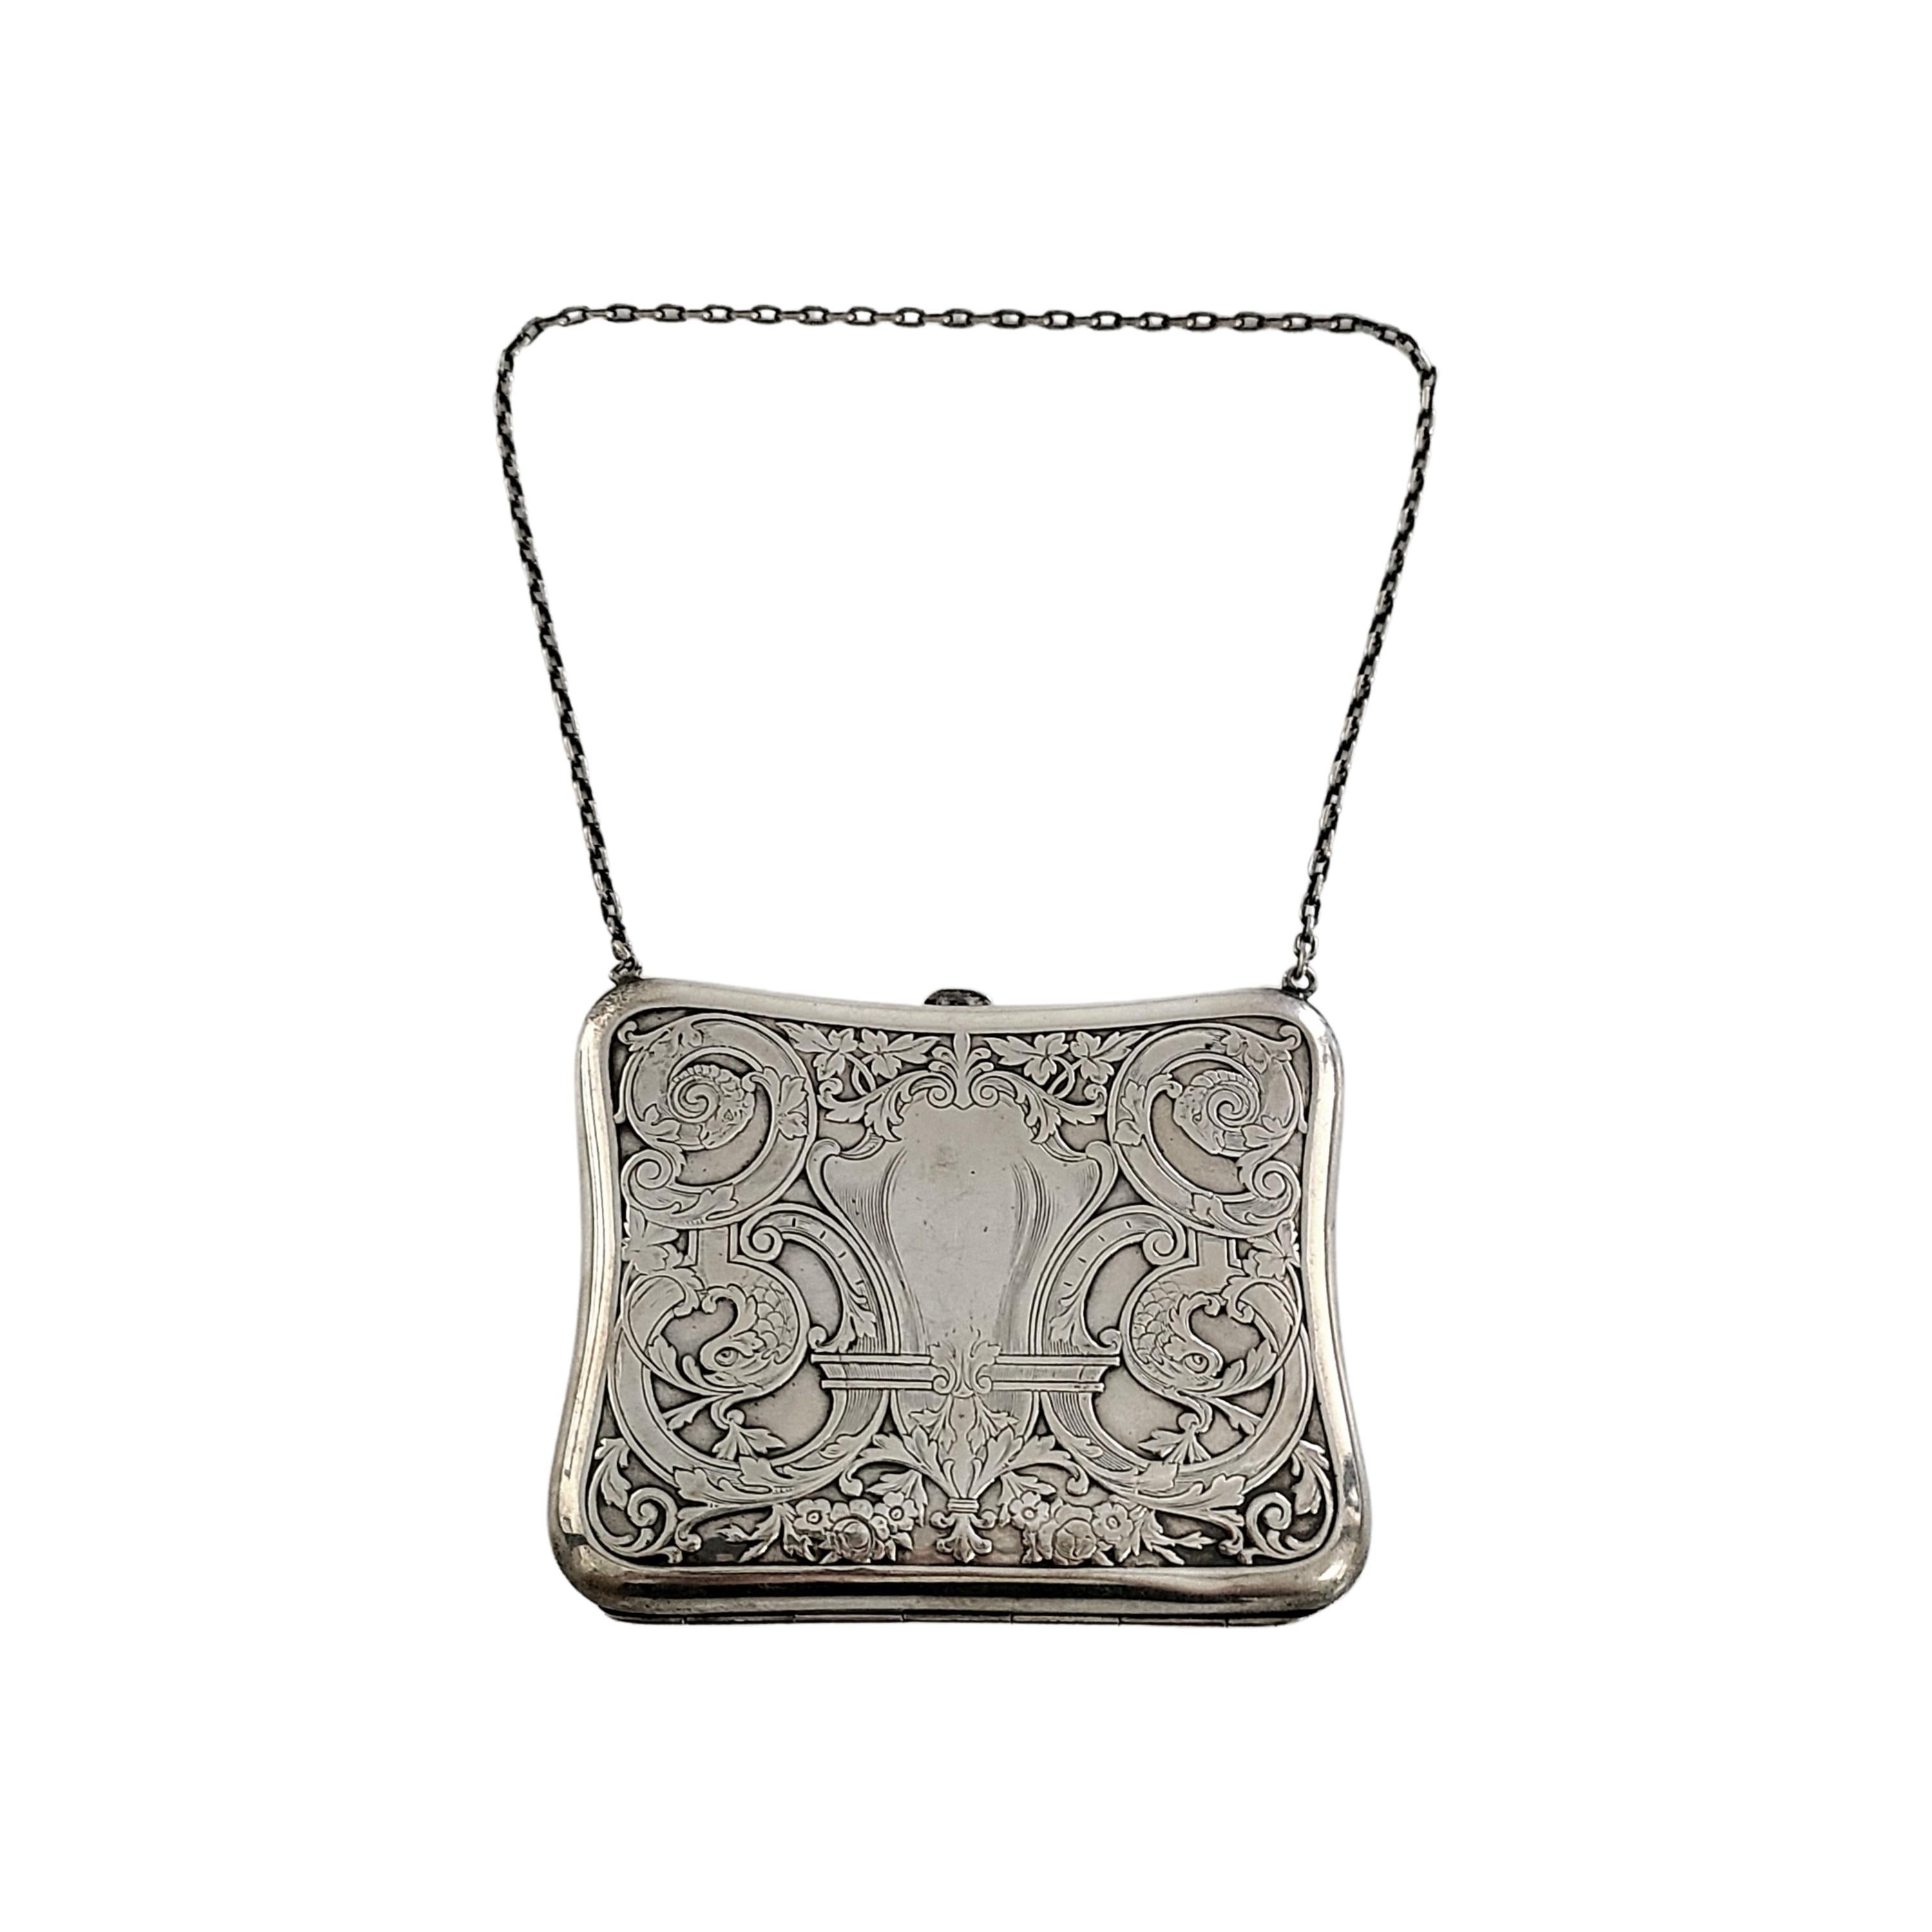 Sterling silver coin purse.

Floral and fish flourish design with monogram on one side. Oval link chain strap, push button open and closure.

Monogram appears to be AEP

Measures approx 3 3/4